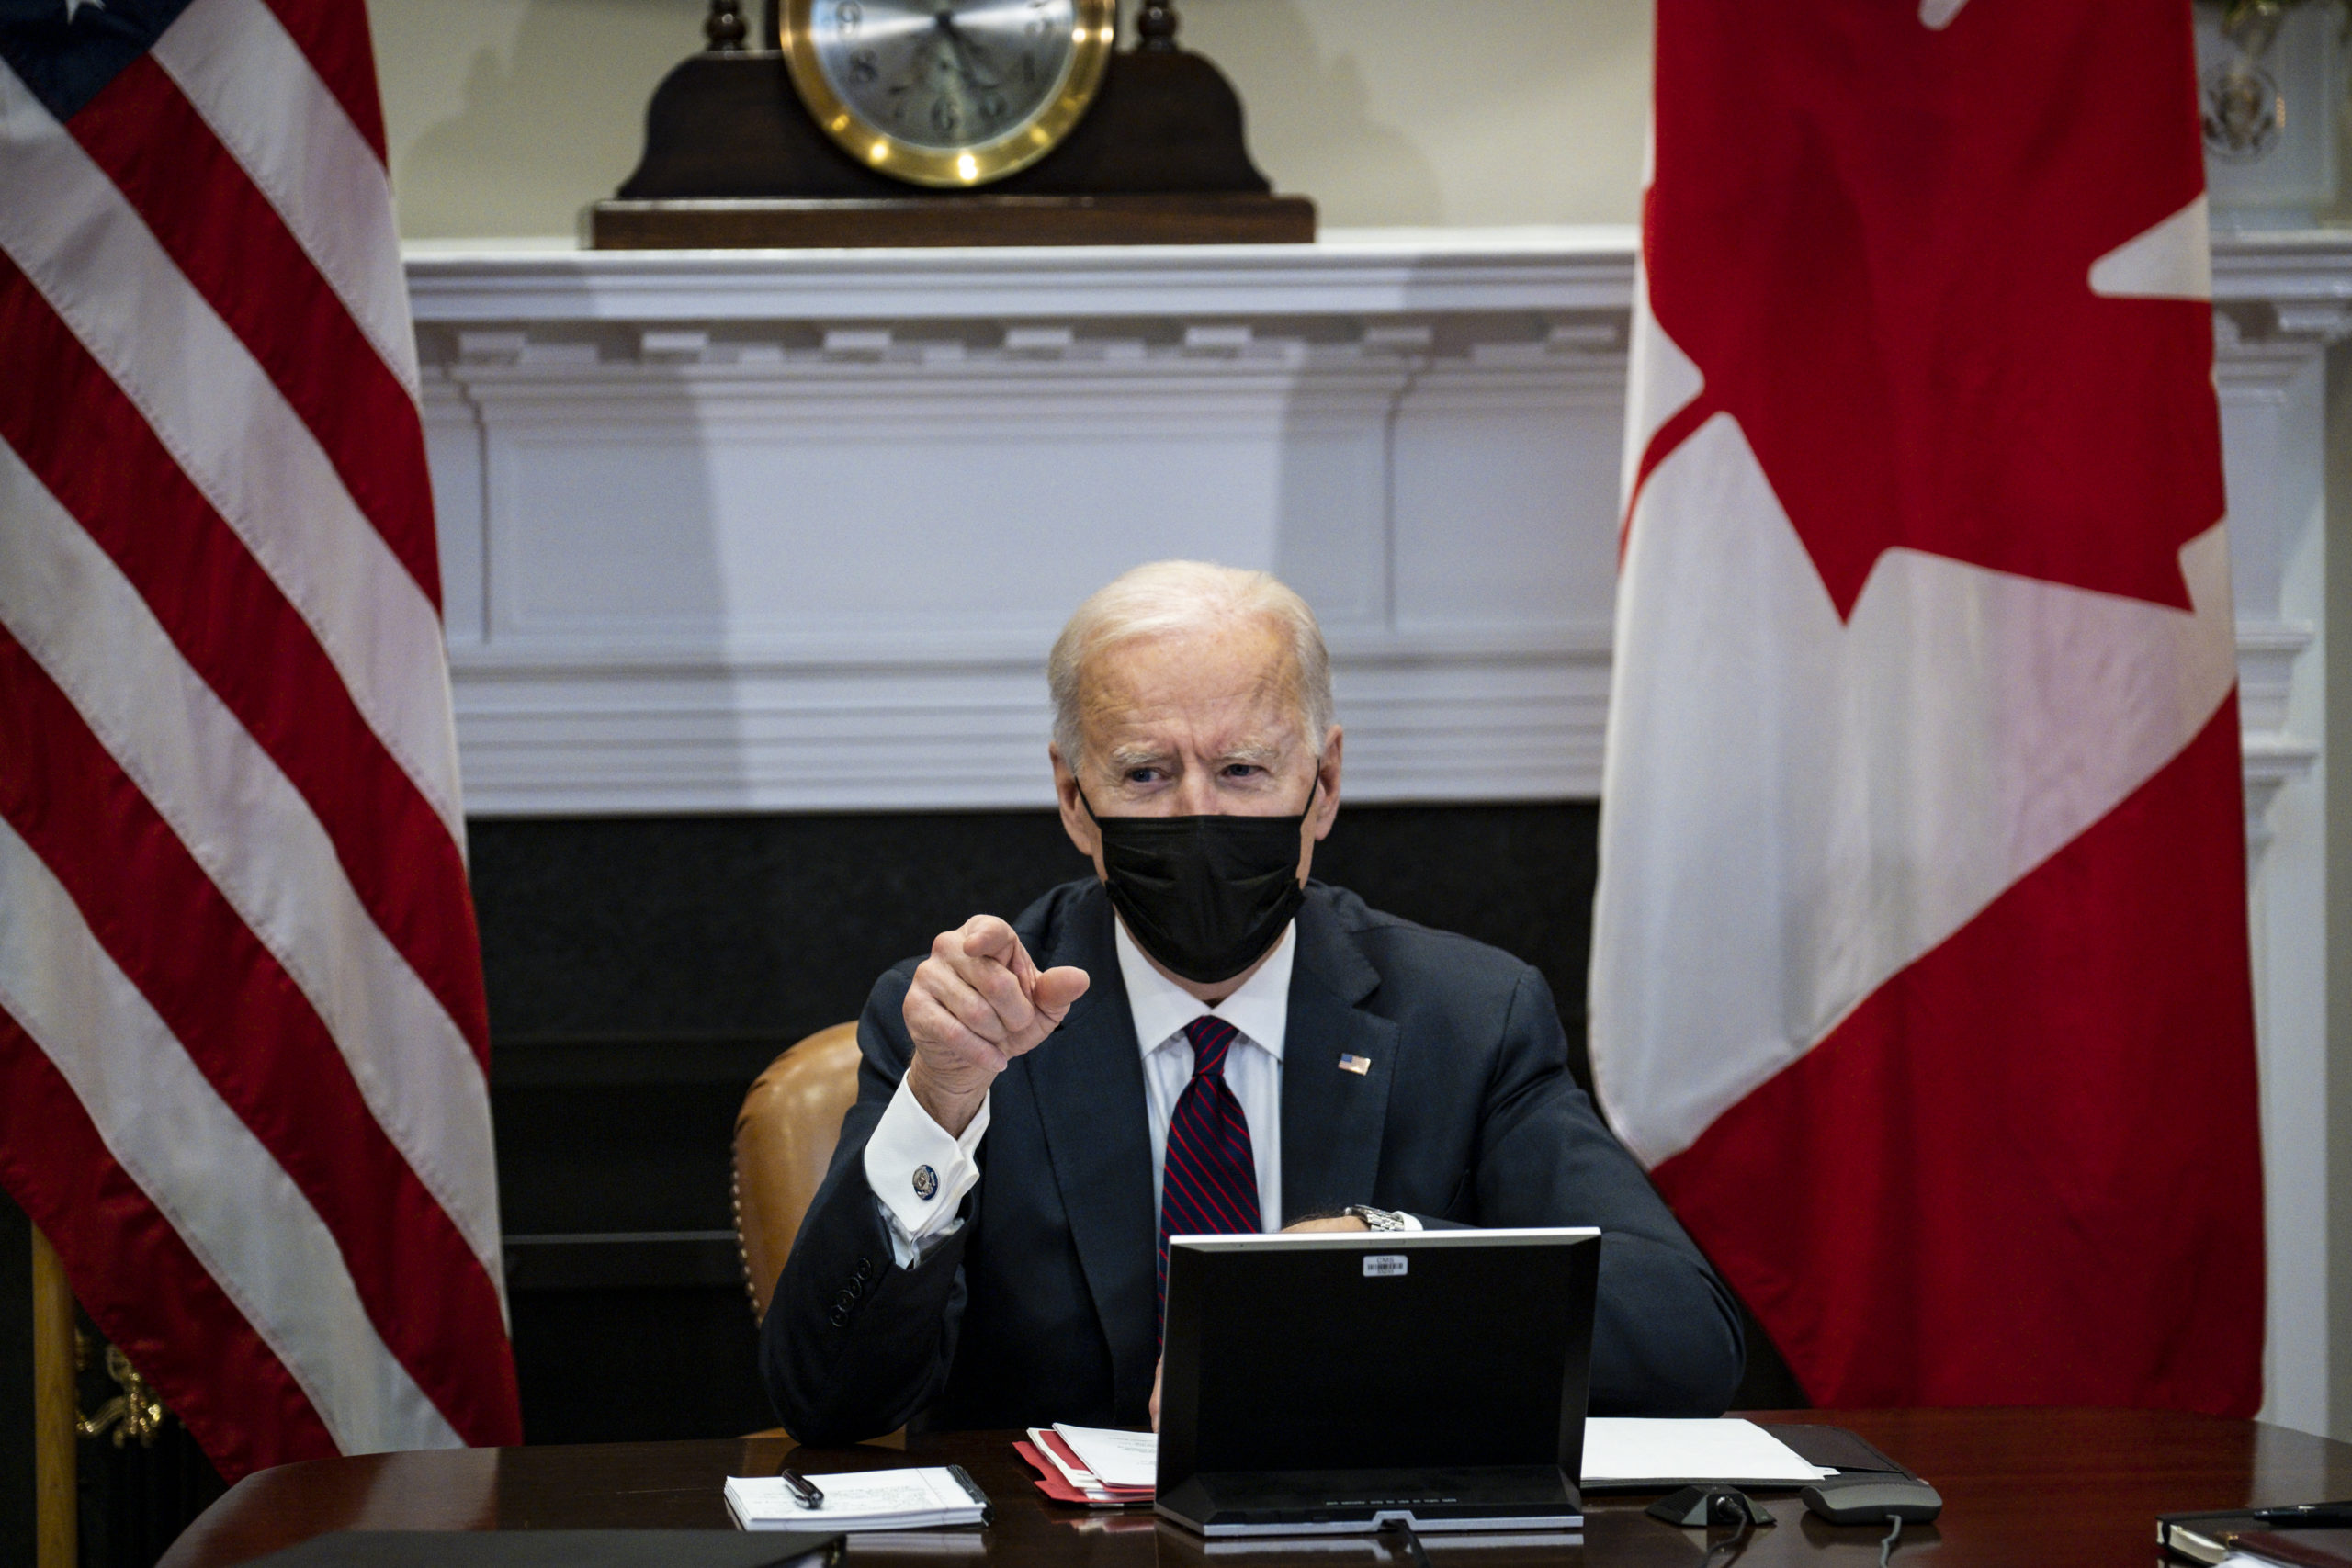 WASHINGTON, DC - FEBRUARY 23: U.S. President Joe Biden participates in a virtual bilateral meeting with Prime Minister Justin Trudeau of Canada in the Roosevelt Room of the White House on February 23, 2021 in Washington, DC. This is Biden and Trudeau’s first bilateral meeting. (Photo by Pete Marovich/Pool/Getty Images)